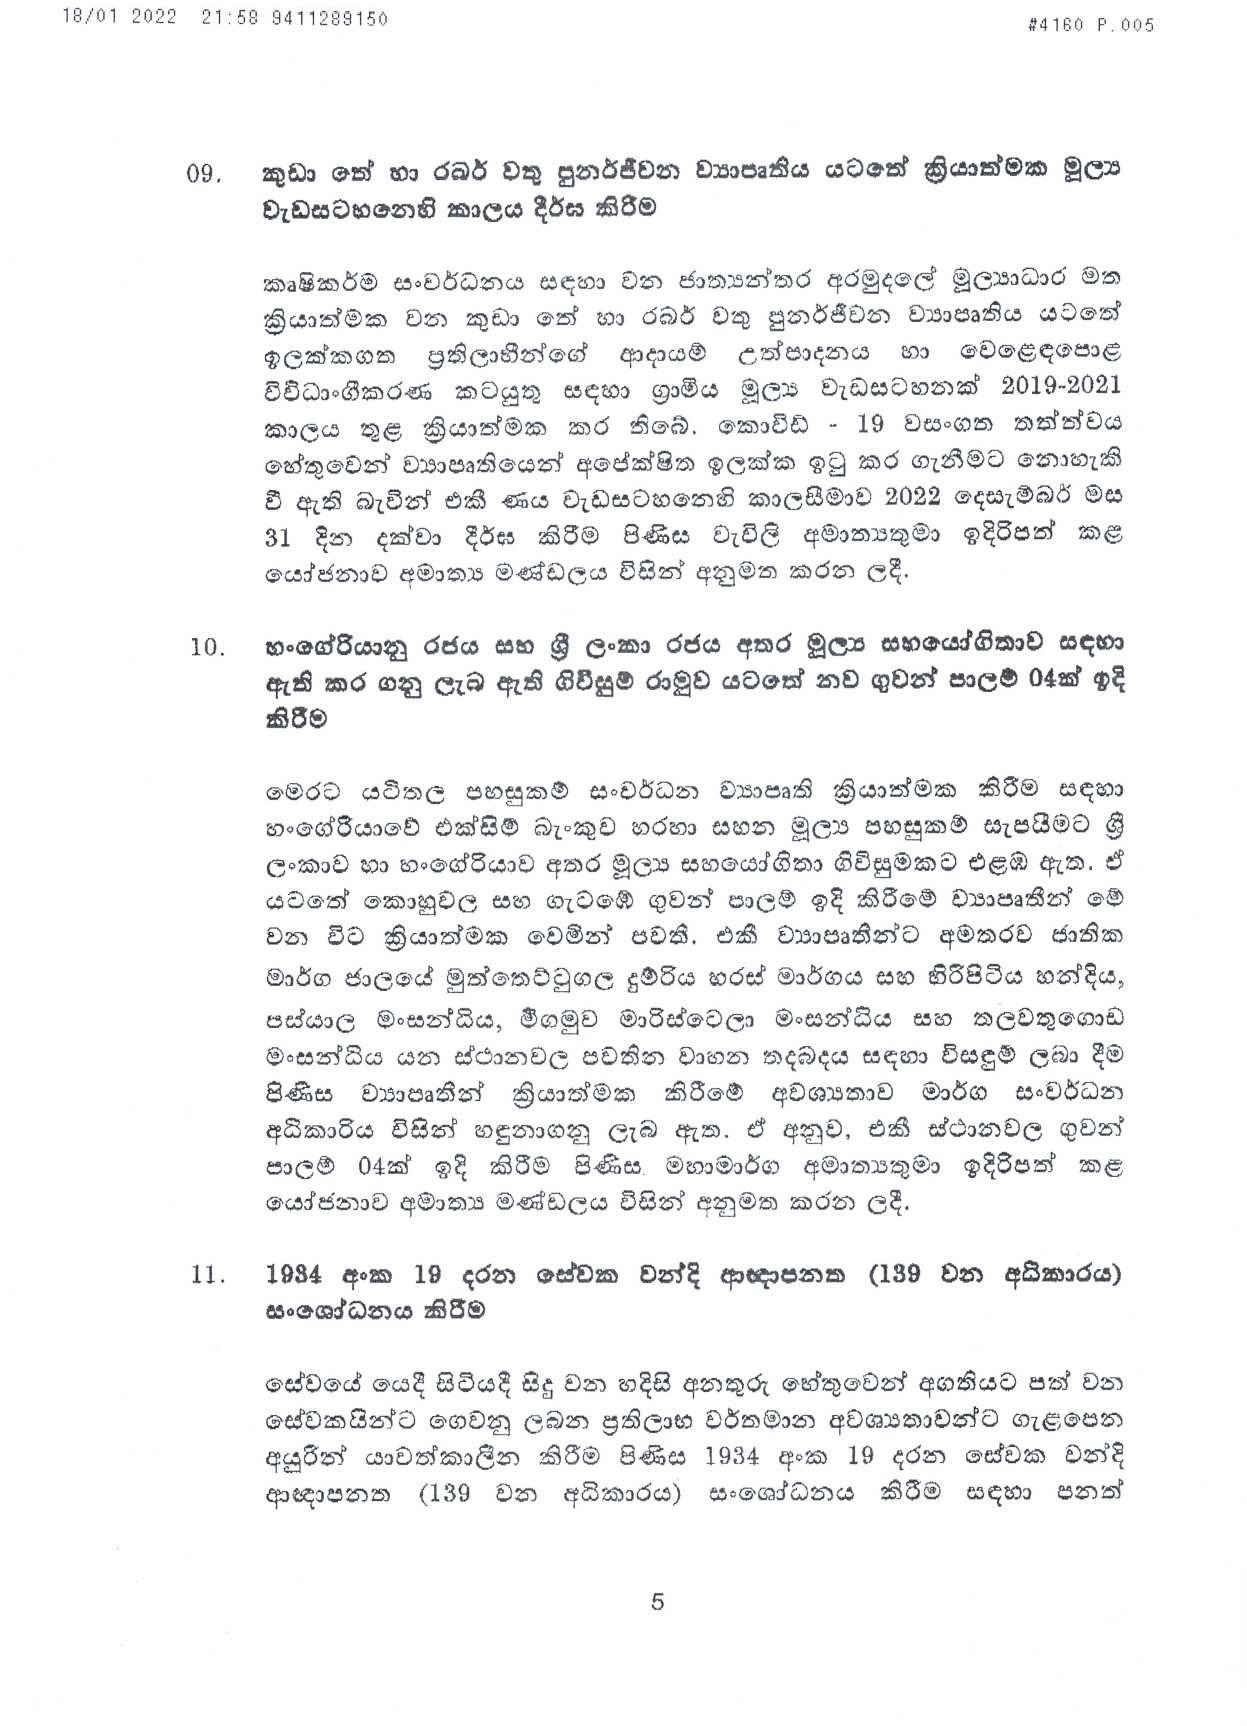 Cabinet Decision on 18.01.2022 page 005